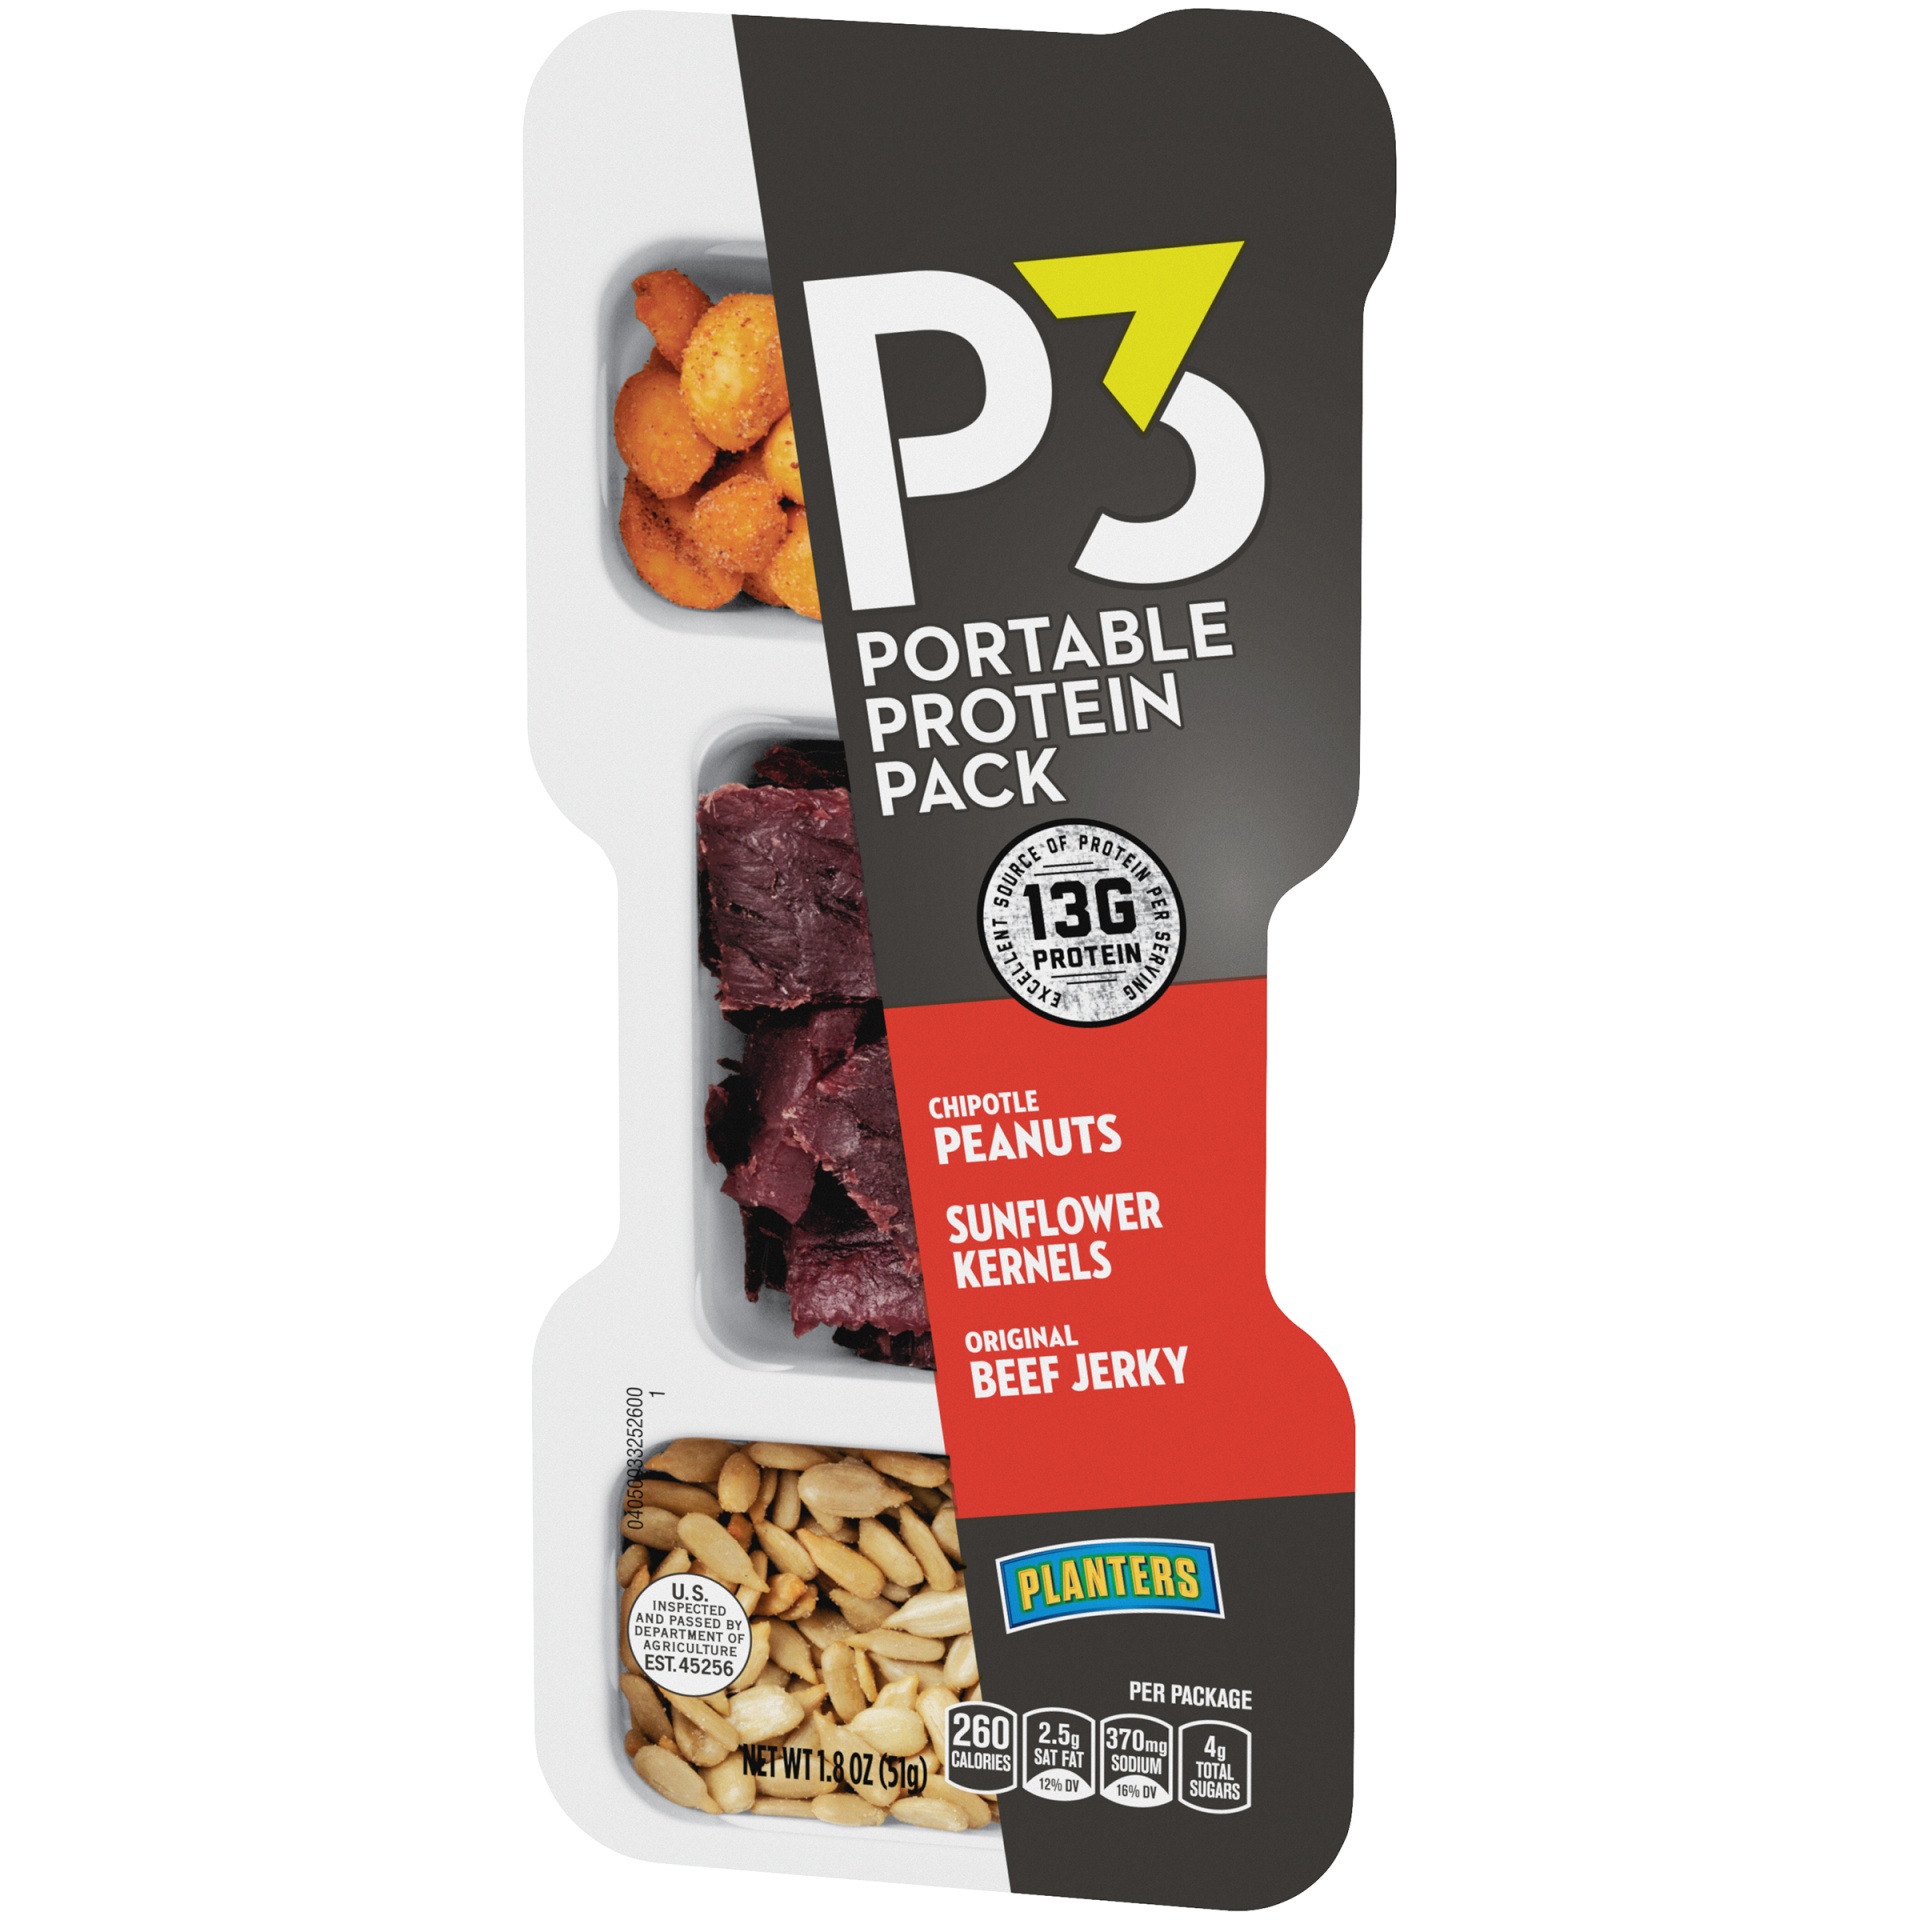 slide 4 of 7, P3 Portable Protein Snack Pack with Chipotle Peanuts, Sunflower Kernels & Original Beef Jerky Tray, 1.8 oz